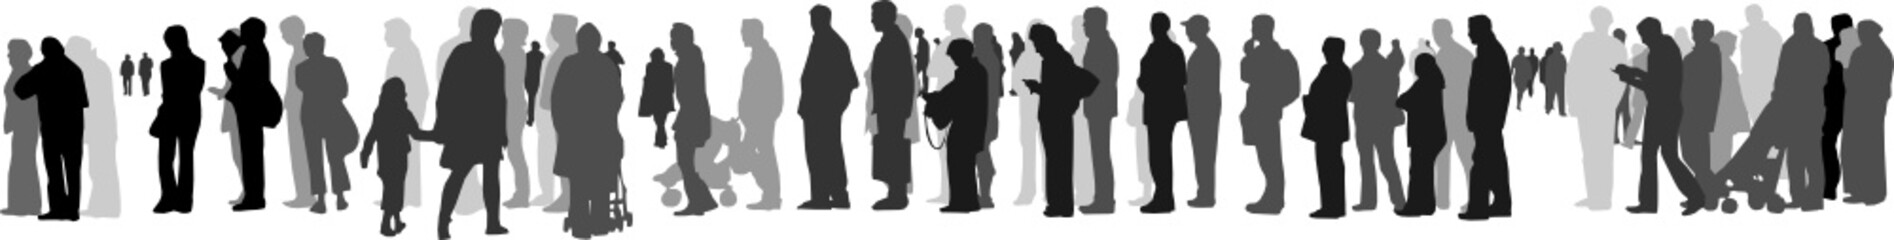 people waiting in queue silhouette vector - 9433429